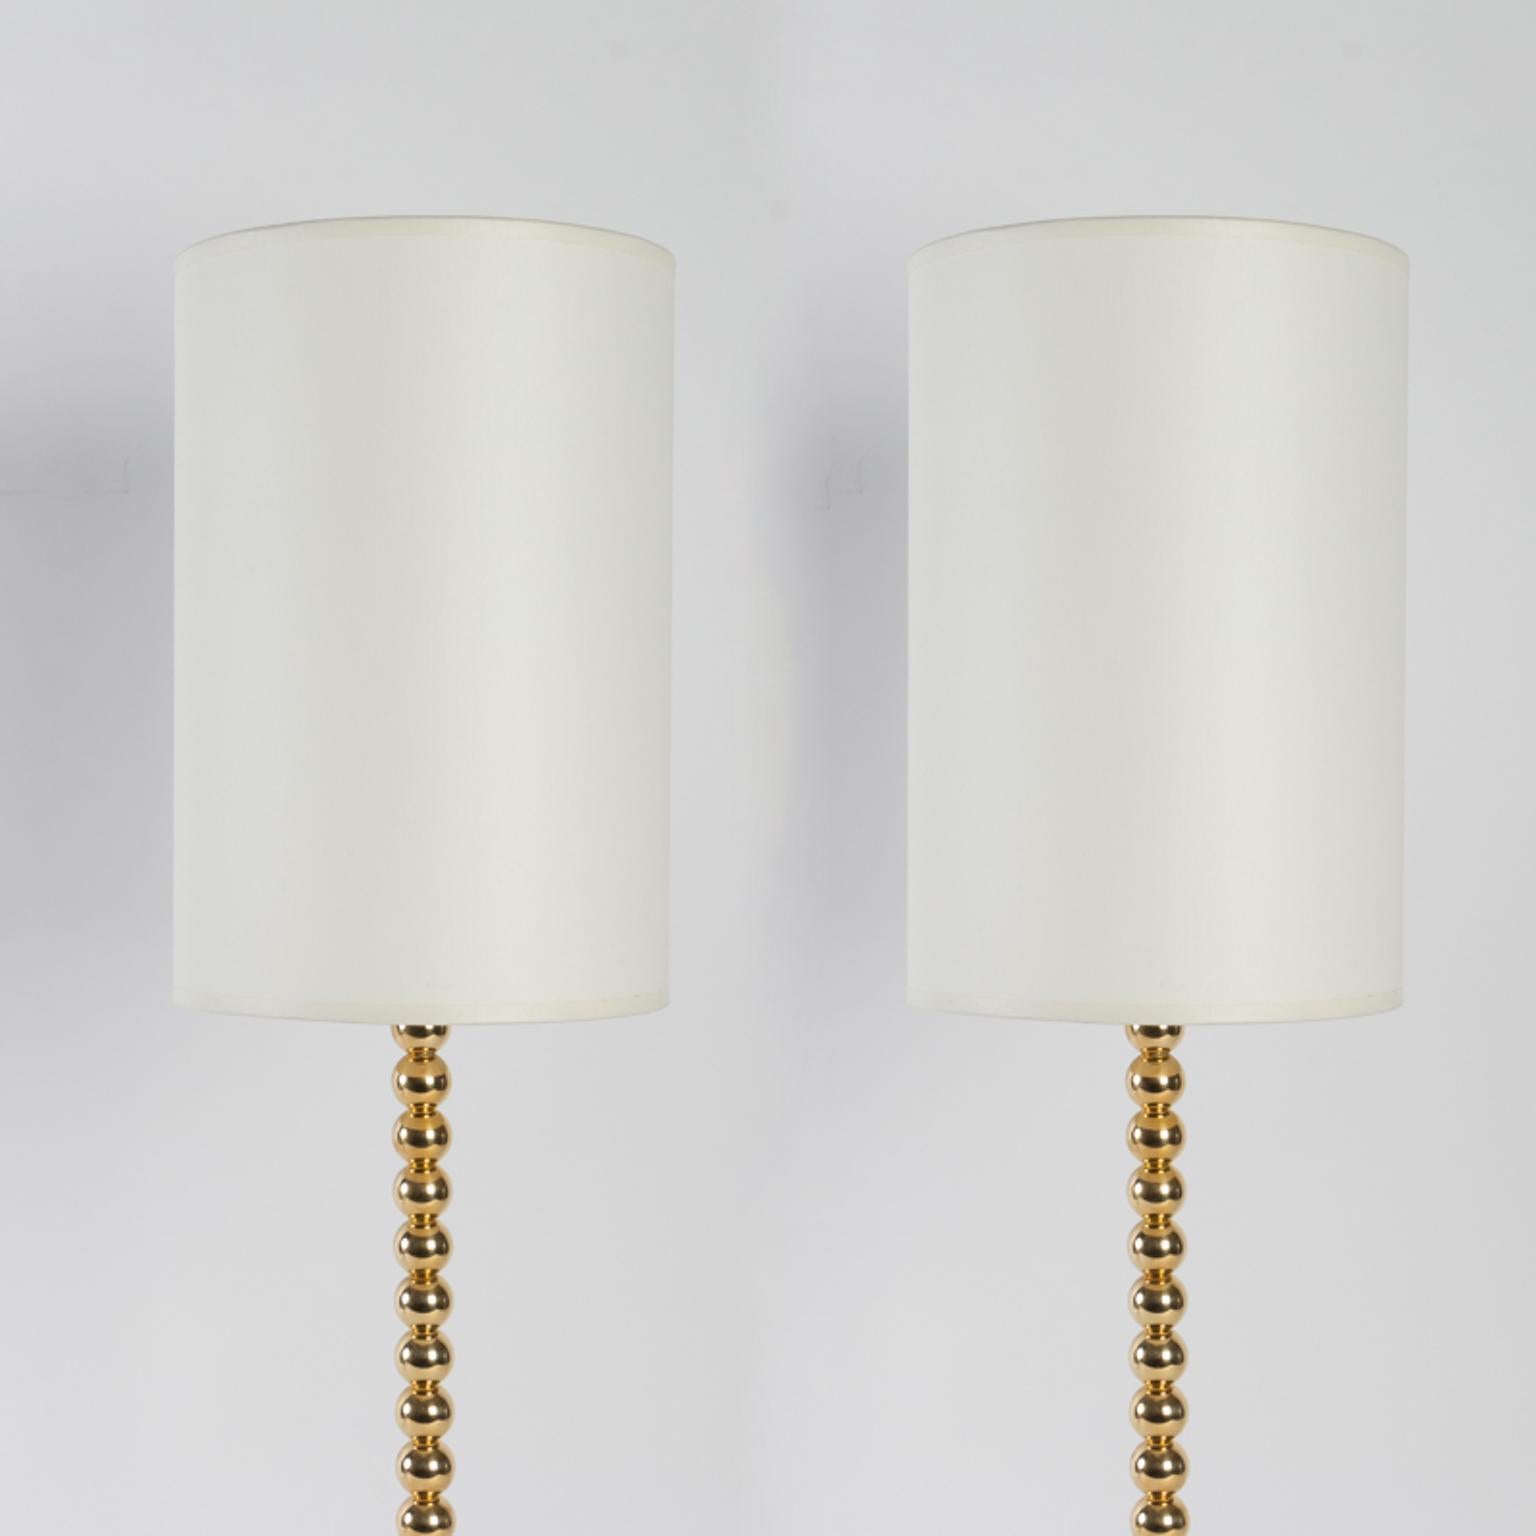 Hollywood Regency Contemporary Pair of Ribambelle Table Lamps, Vingtieme Edition